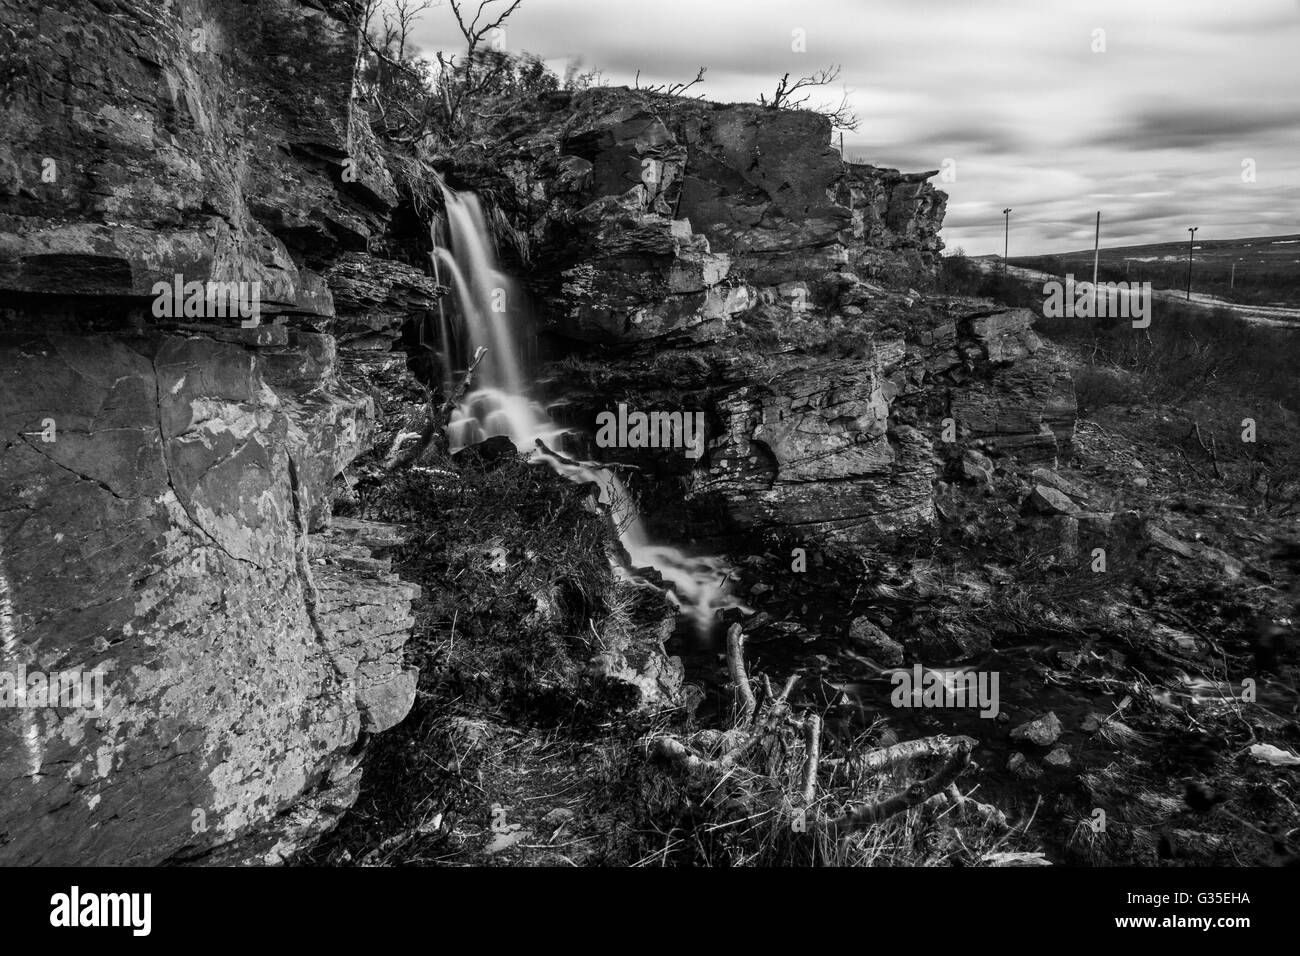 Fossen waterfall in Vadso, Norway Stock Photo